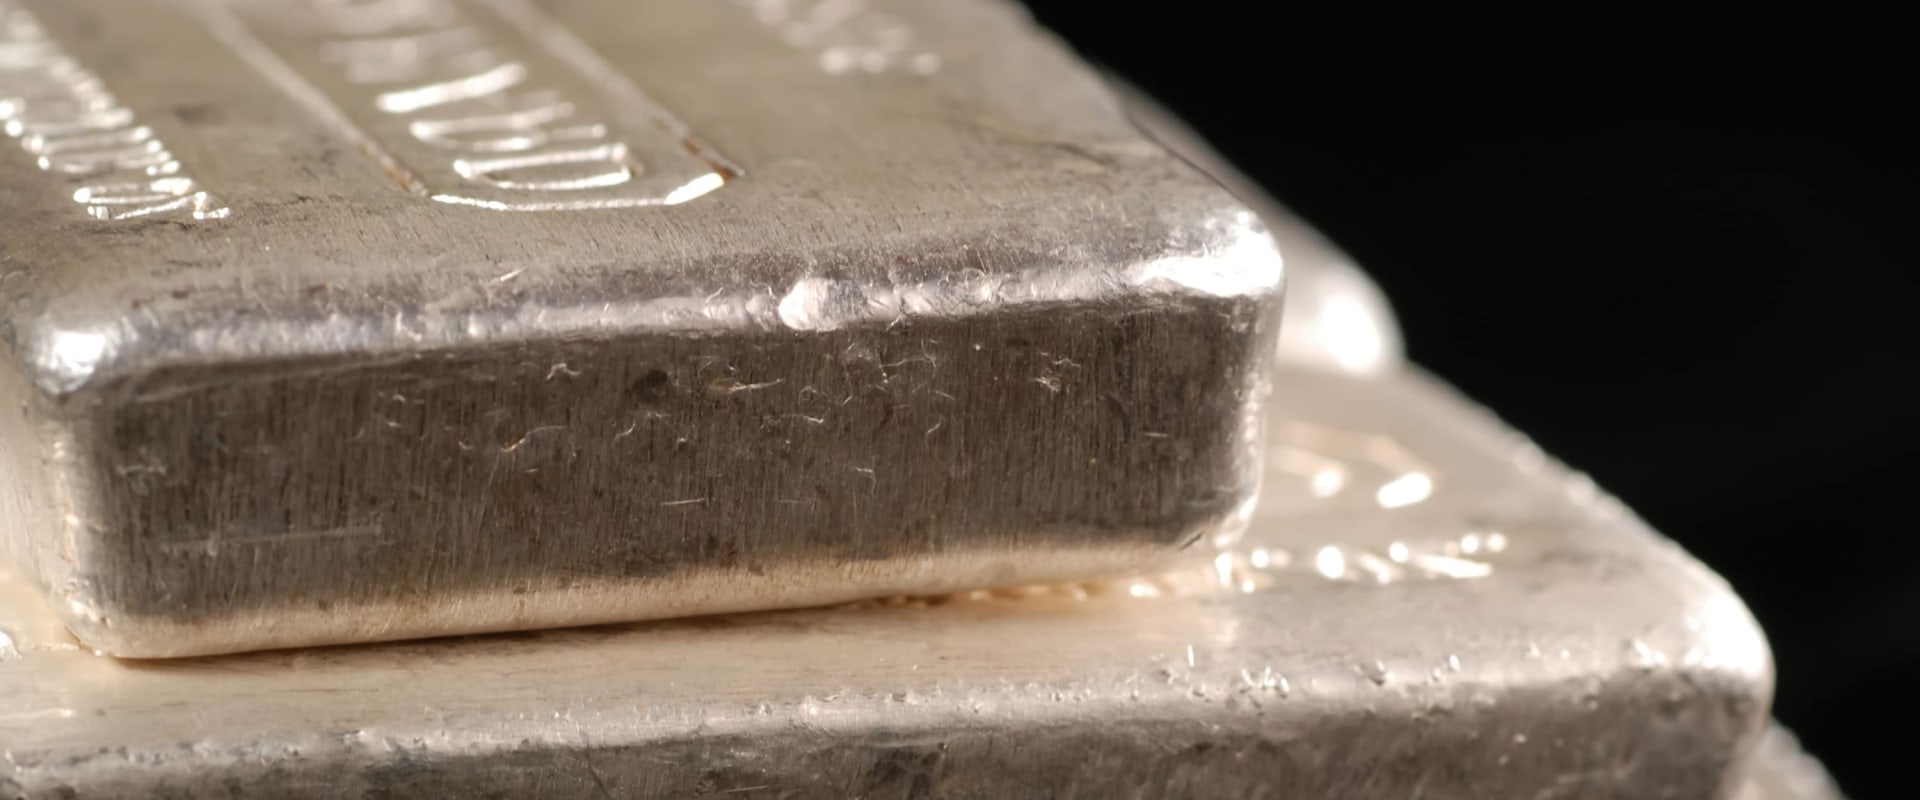 Is buying silver a good long-term investment?